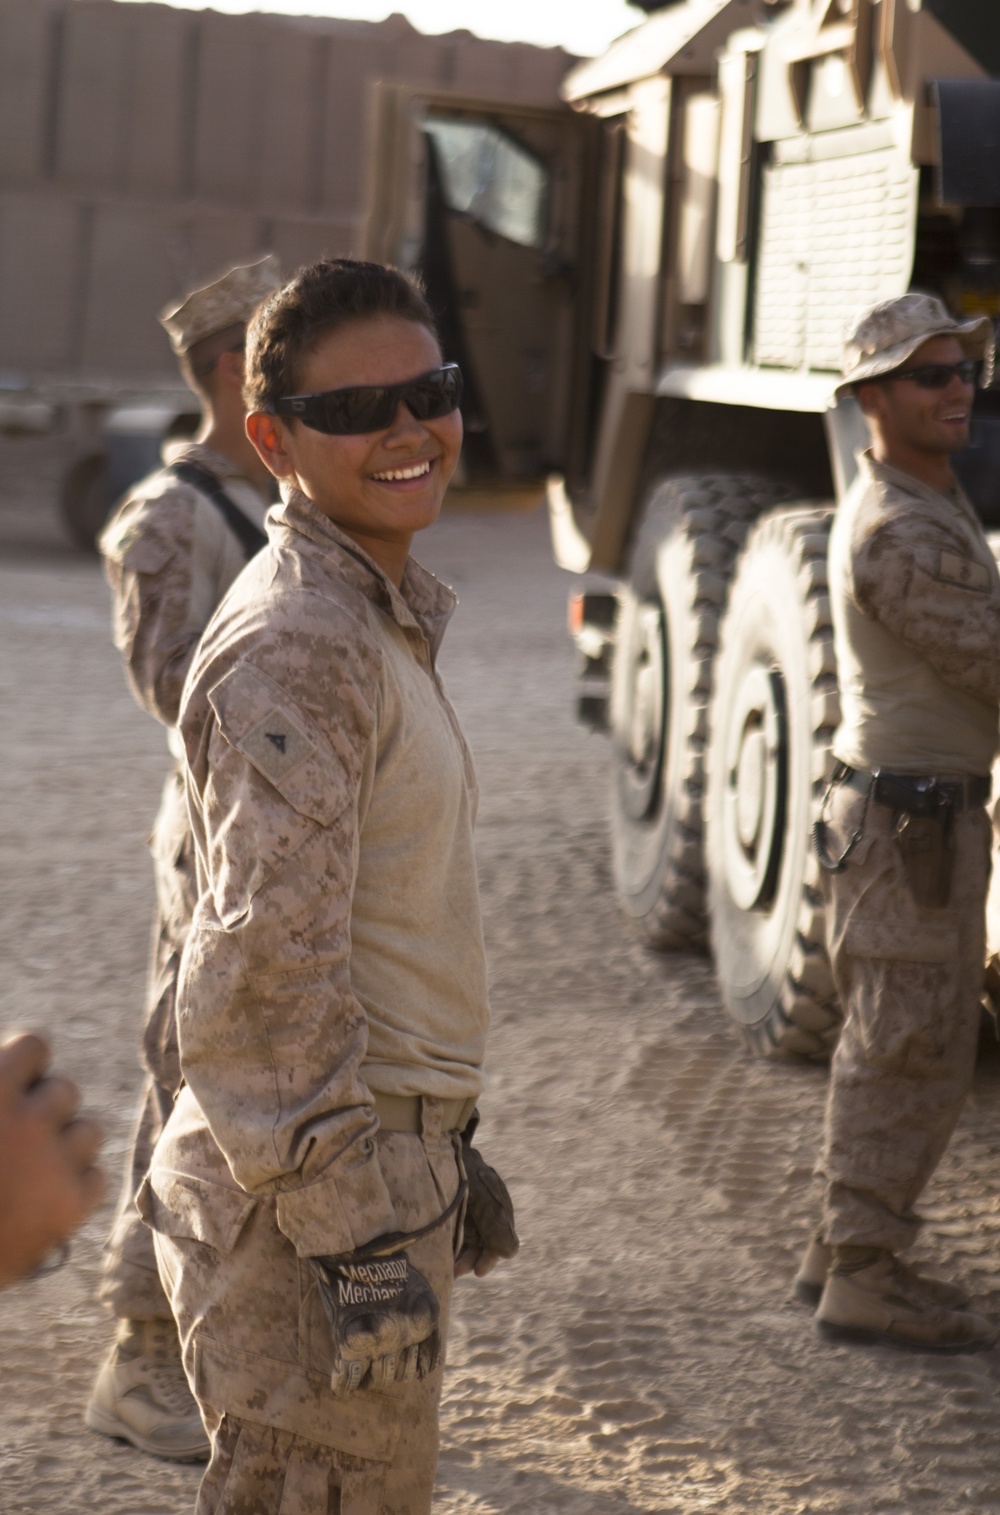 Through their eyes: Armored vehicle driver in Afghanistan